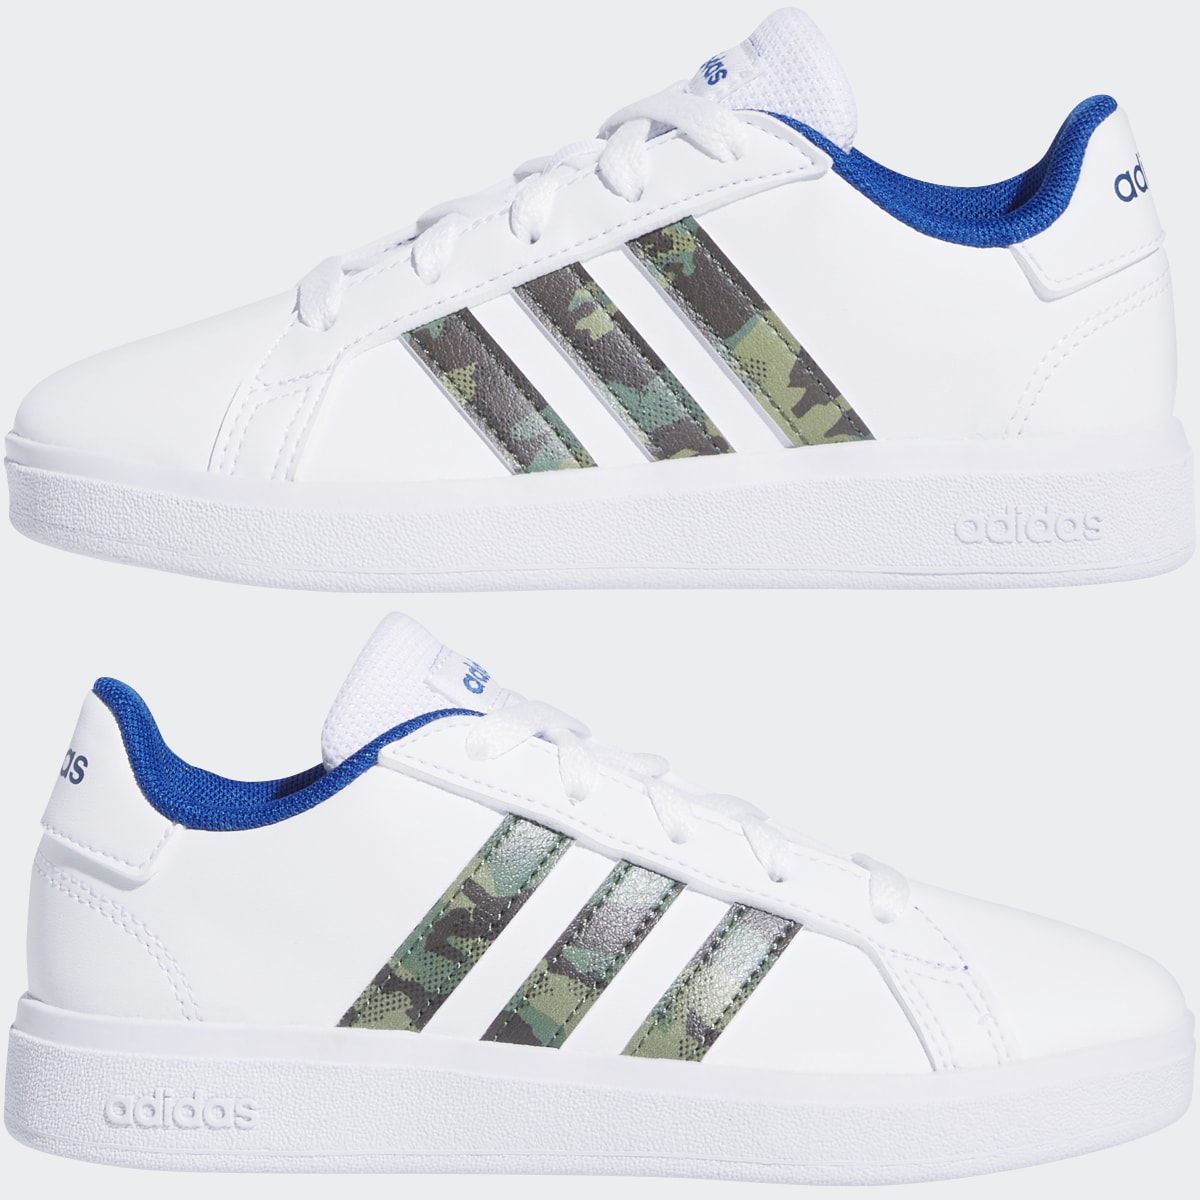 Adidas Grand Court Lifestyle Lace Tennis Shoes. 8